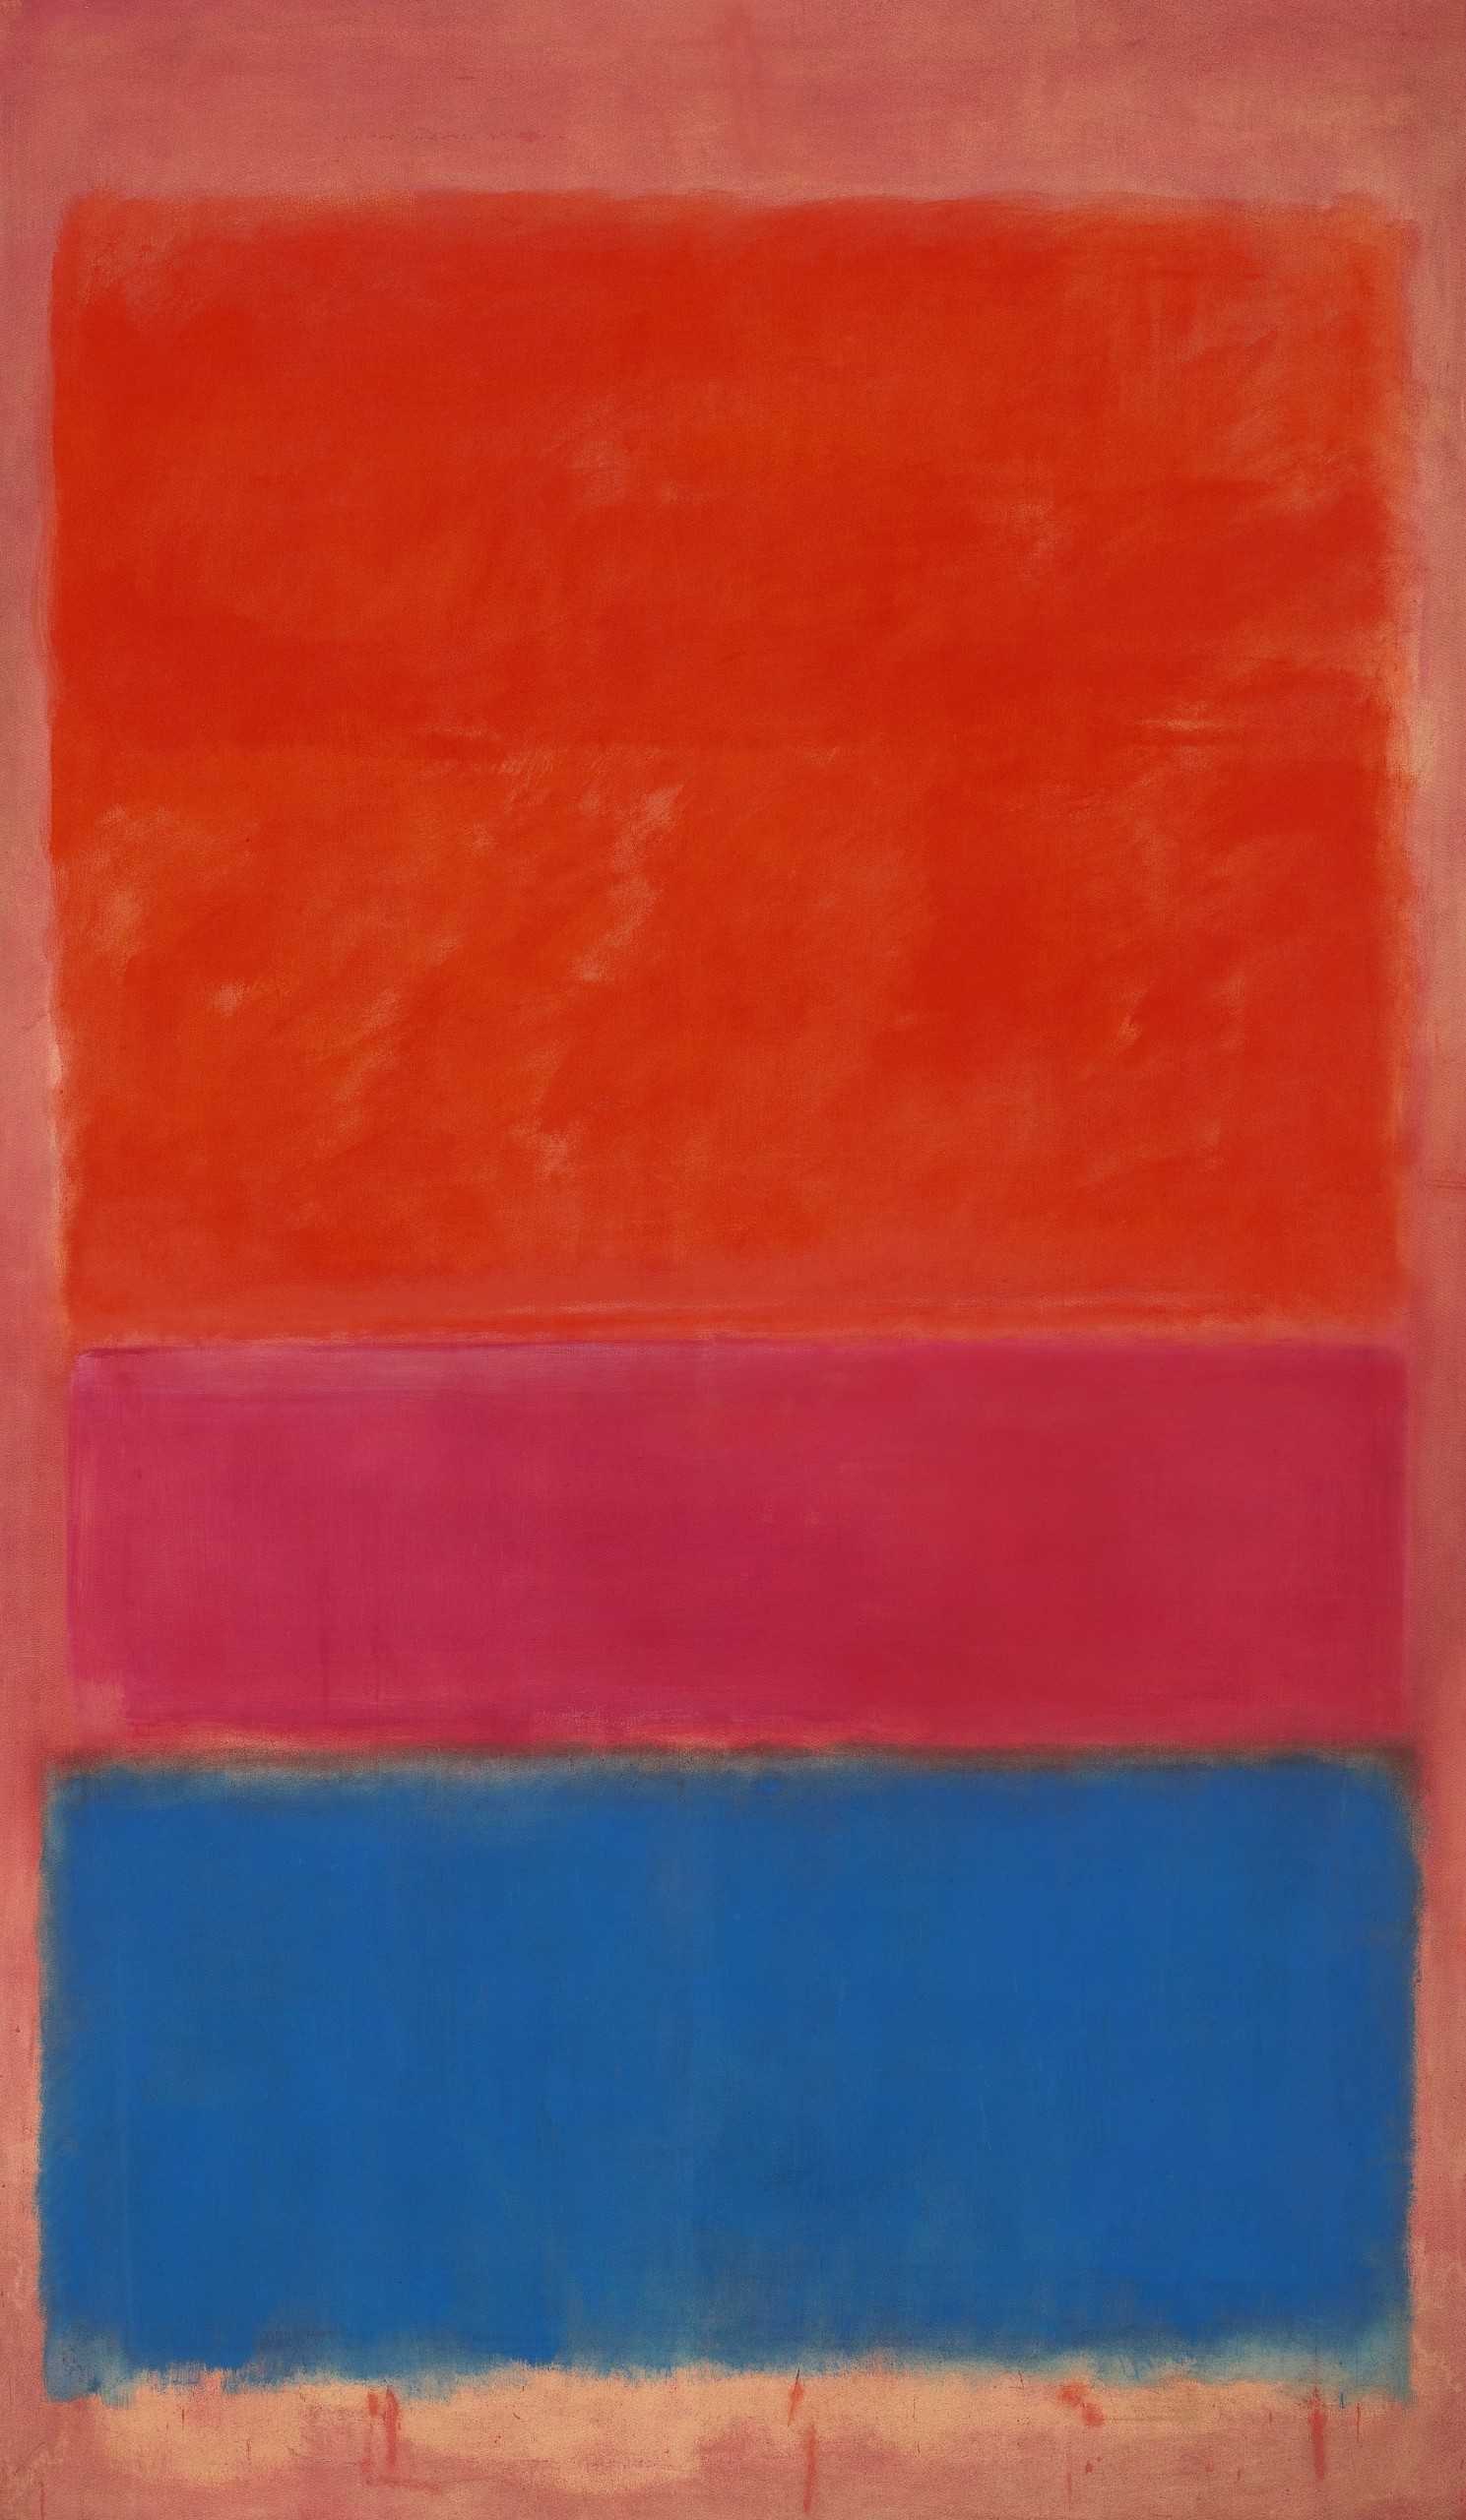 Find out more about Mark Rothko - No 1 (Royal Red and Blue)